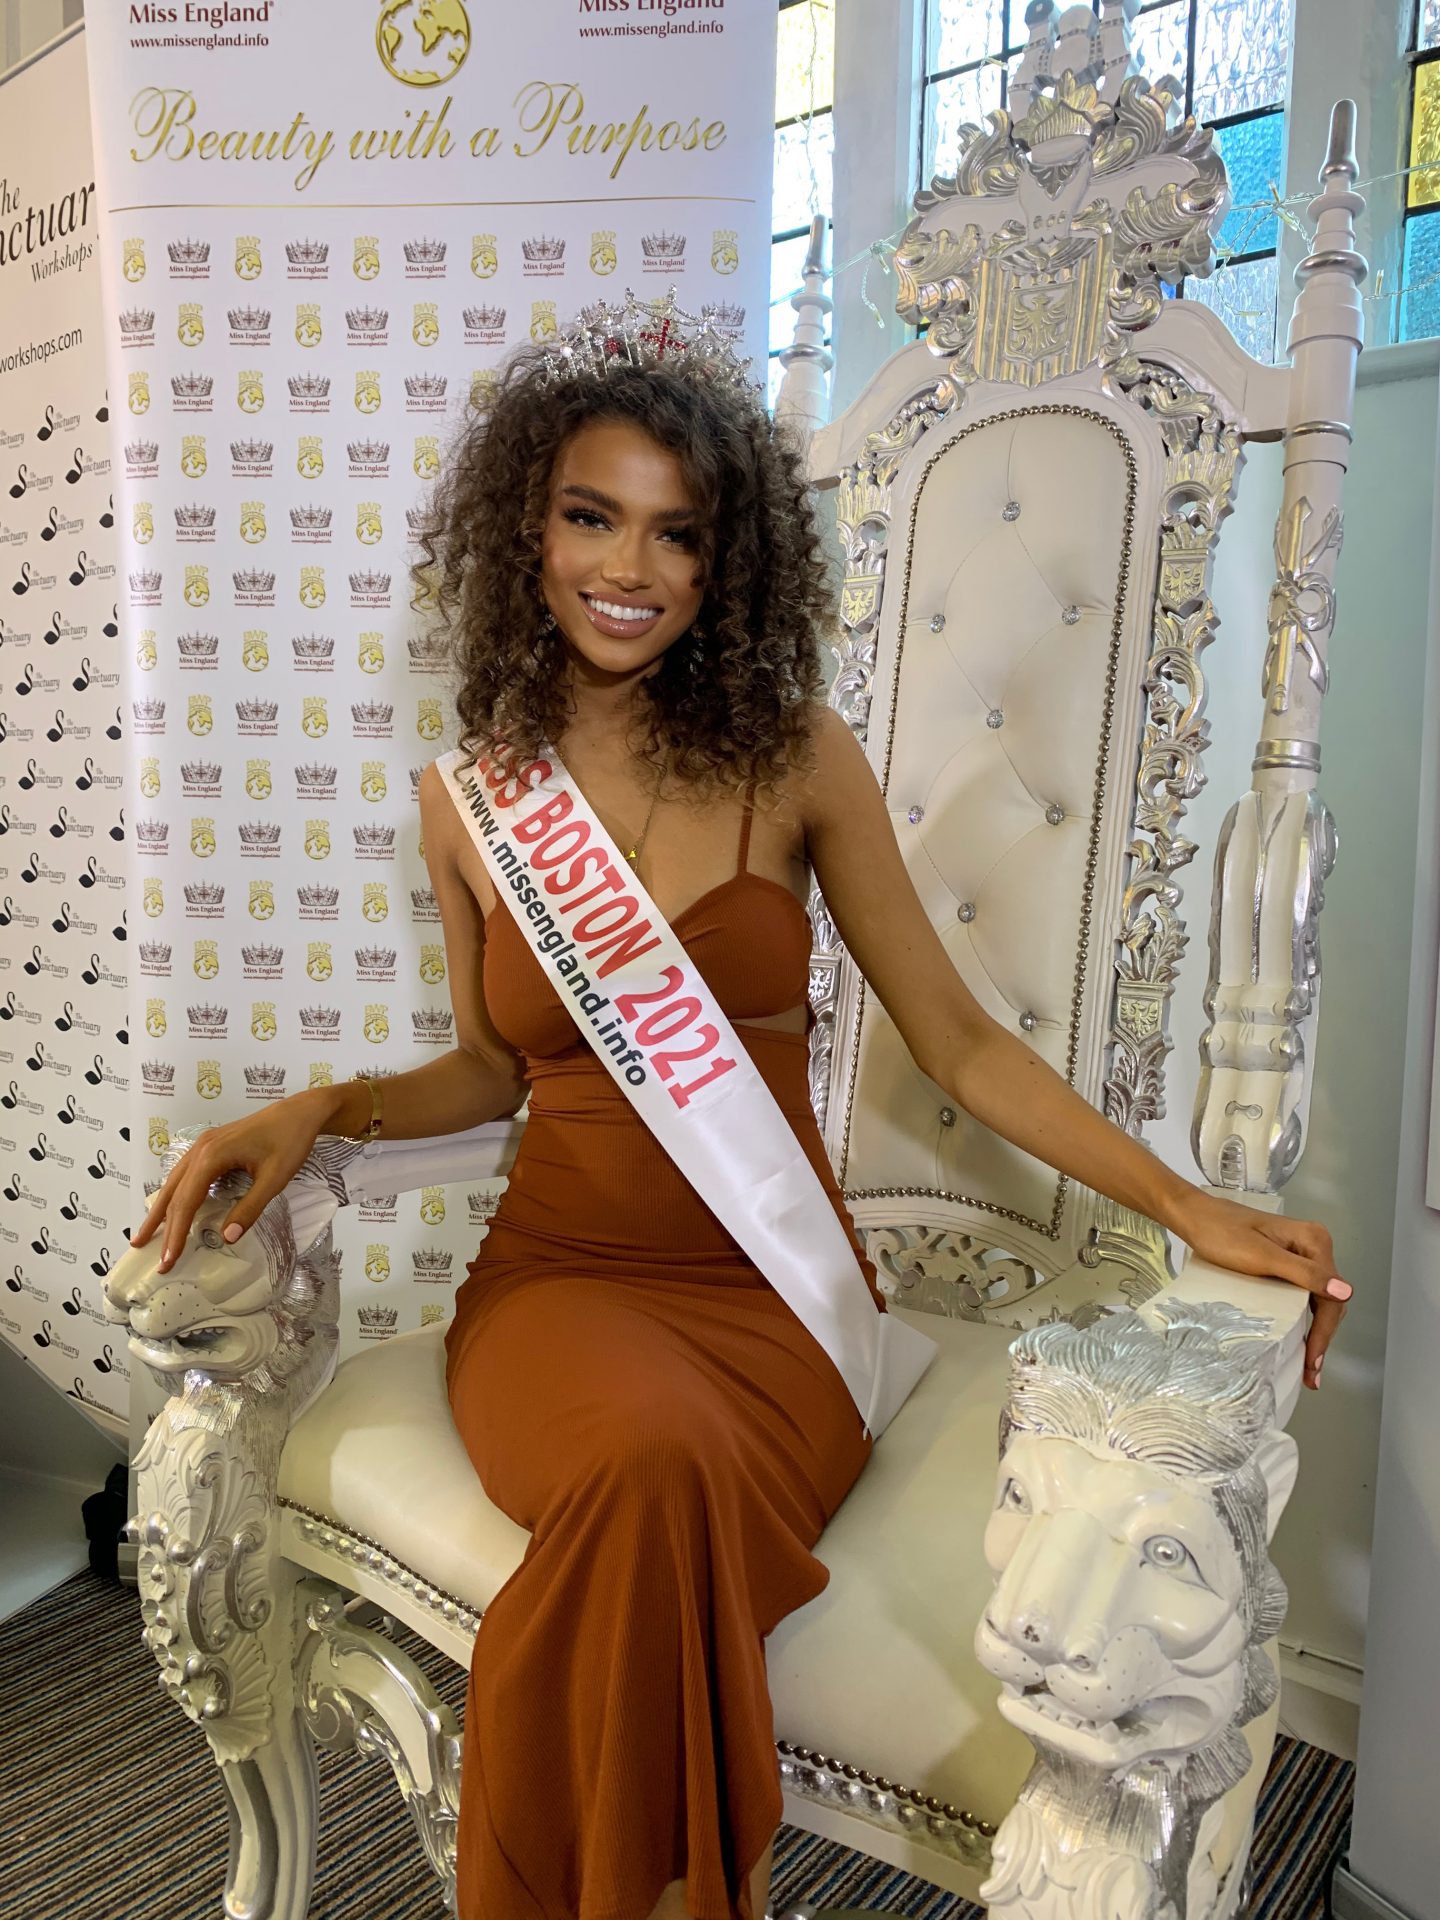 Boston resident in the running for Miss England crown